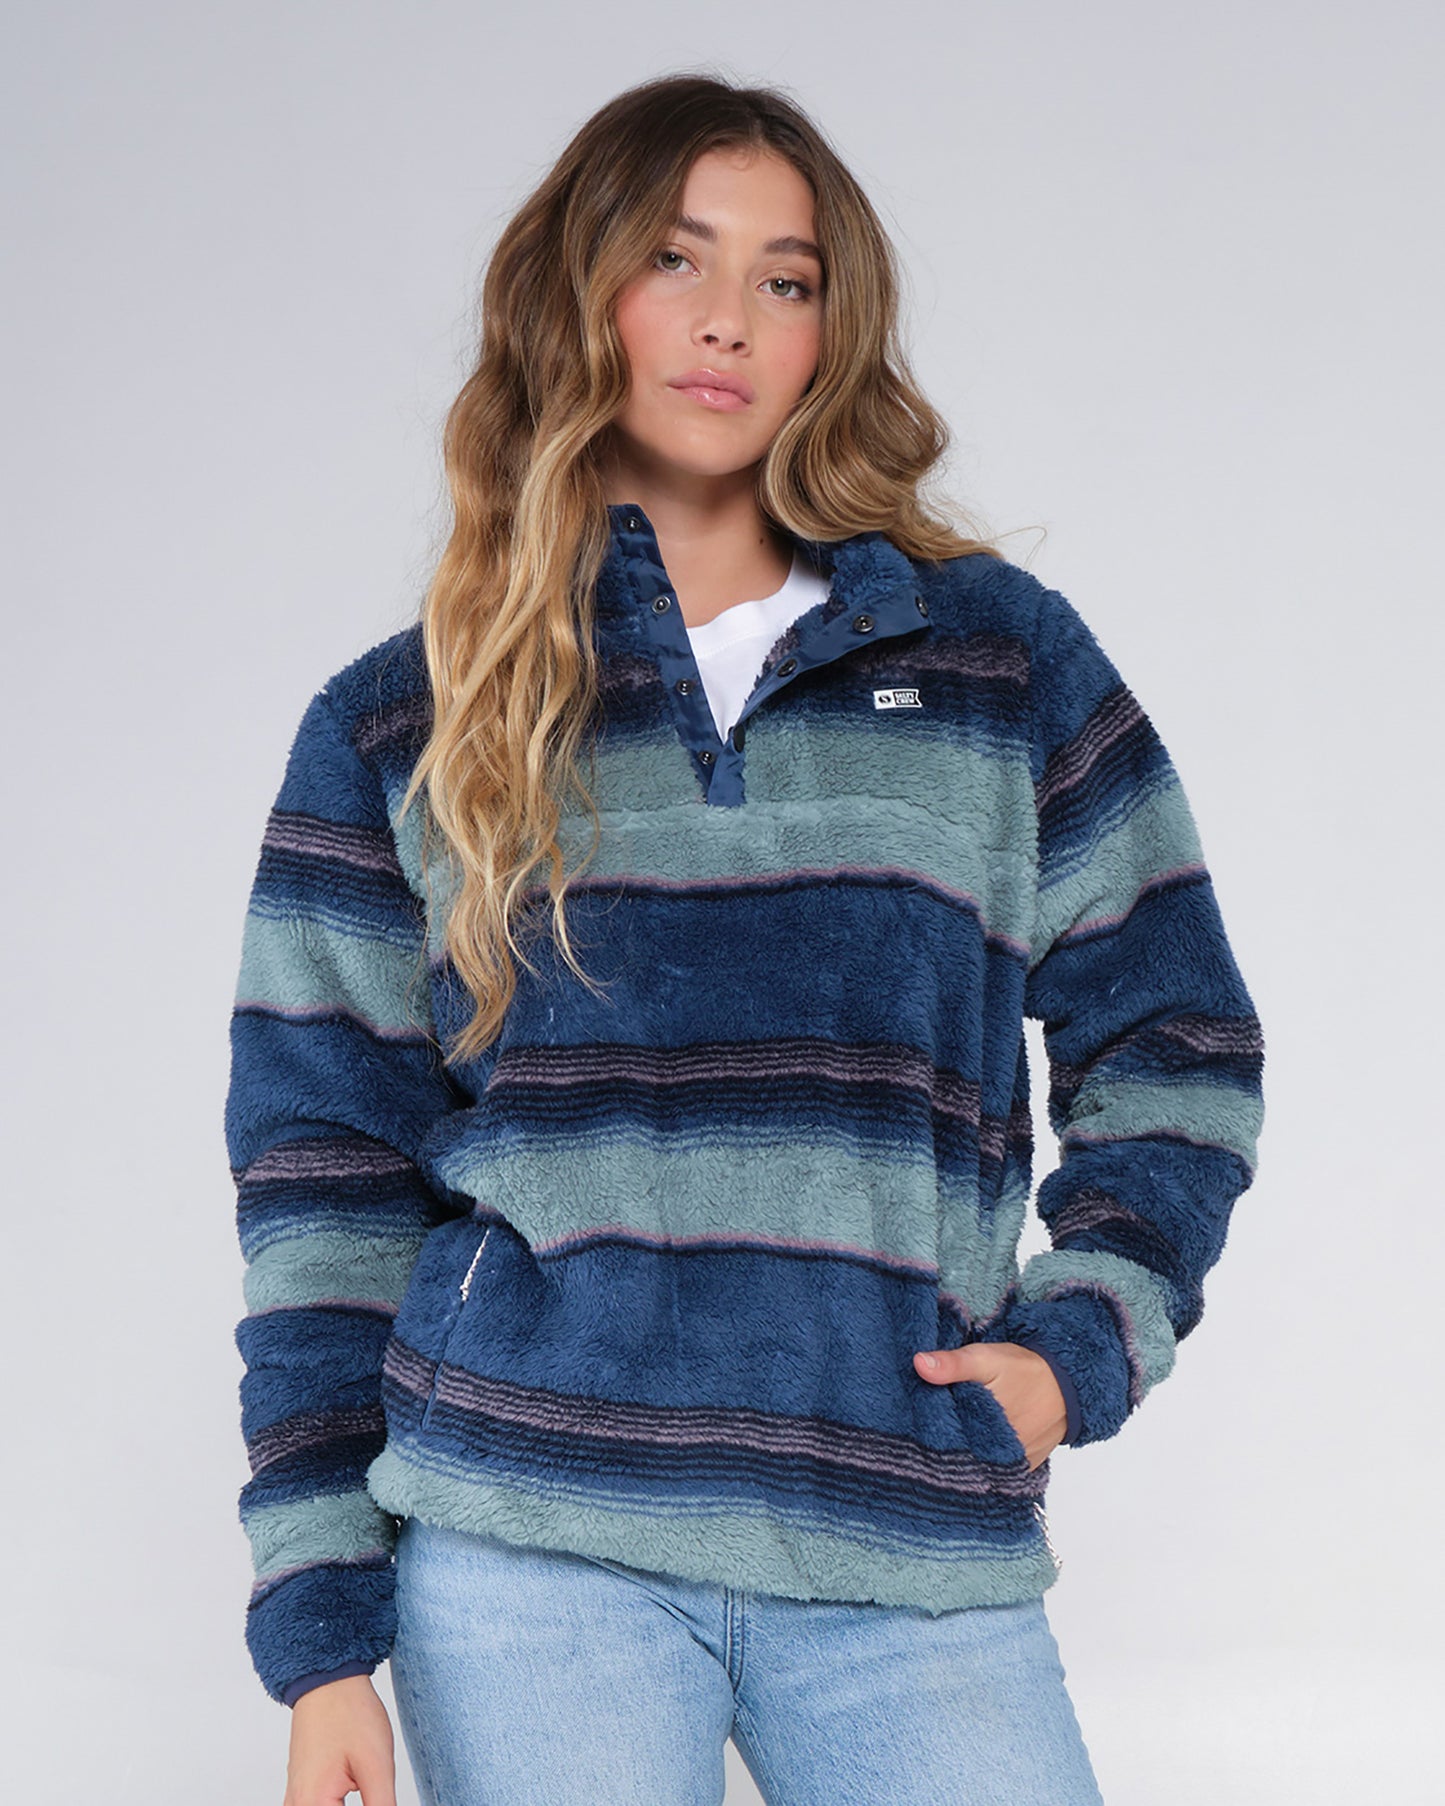 On body front of the Calm Seas Blue Steel Pullover